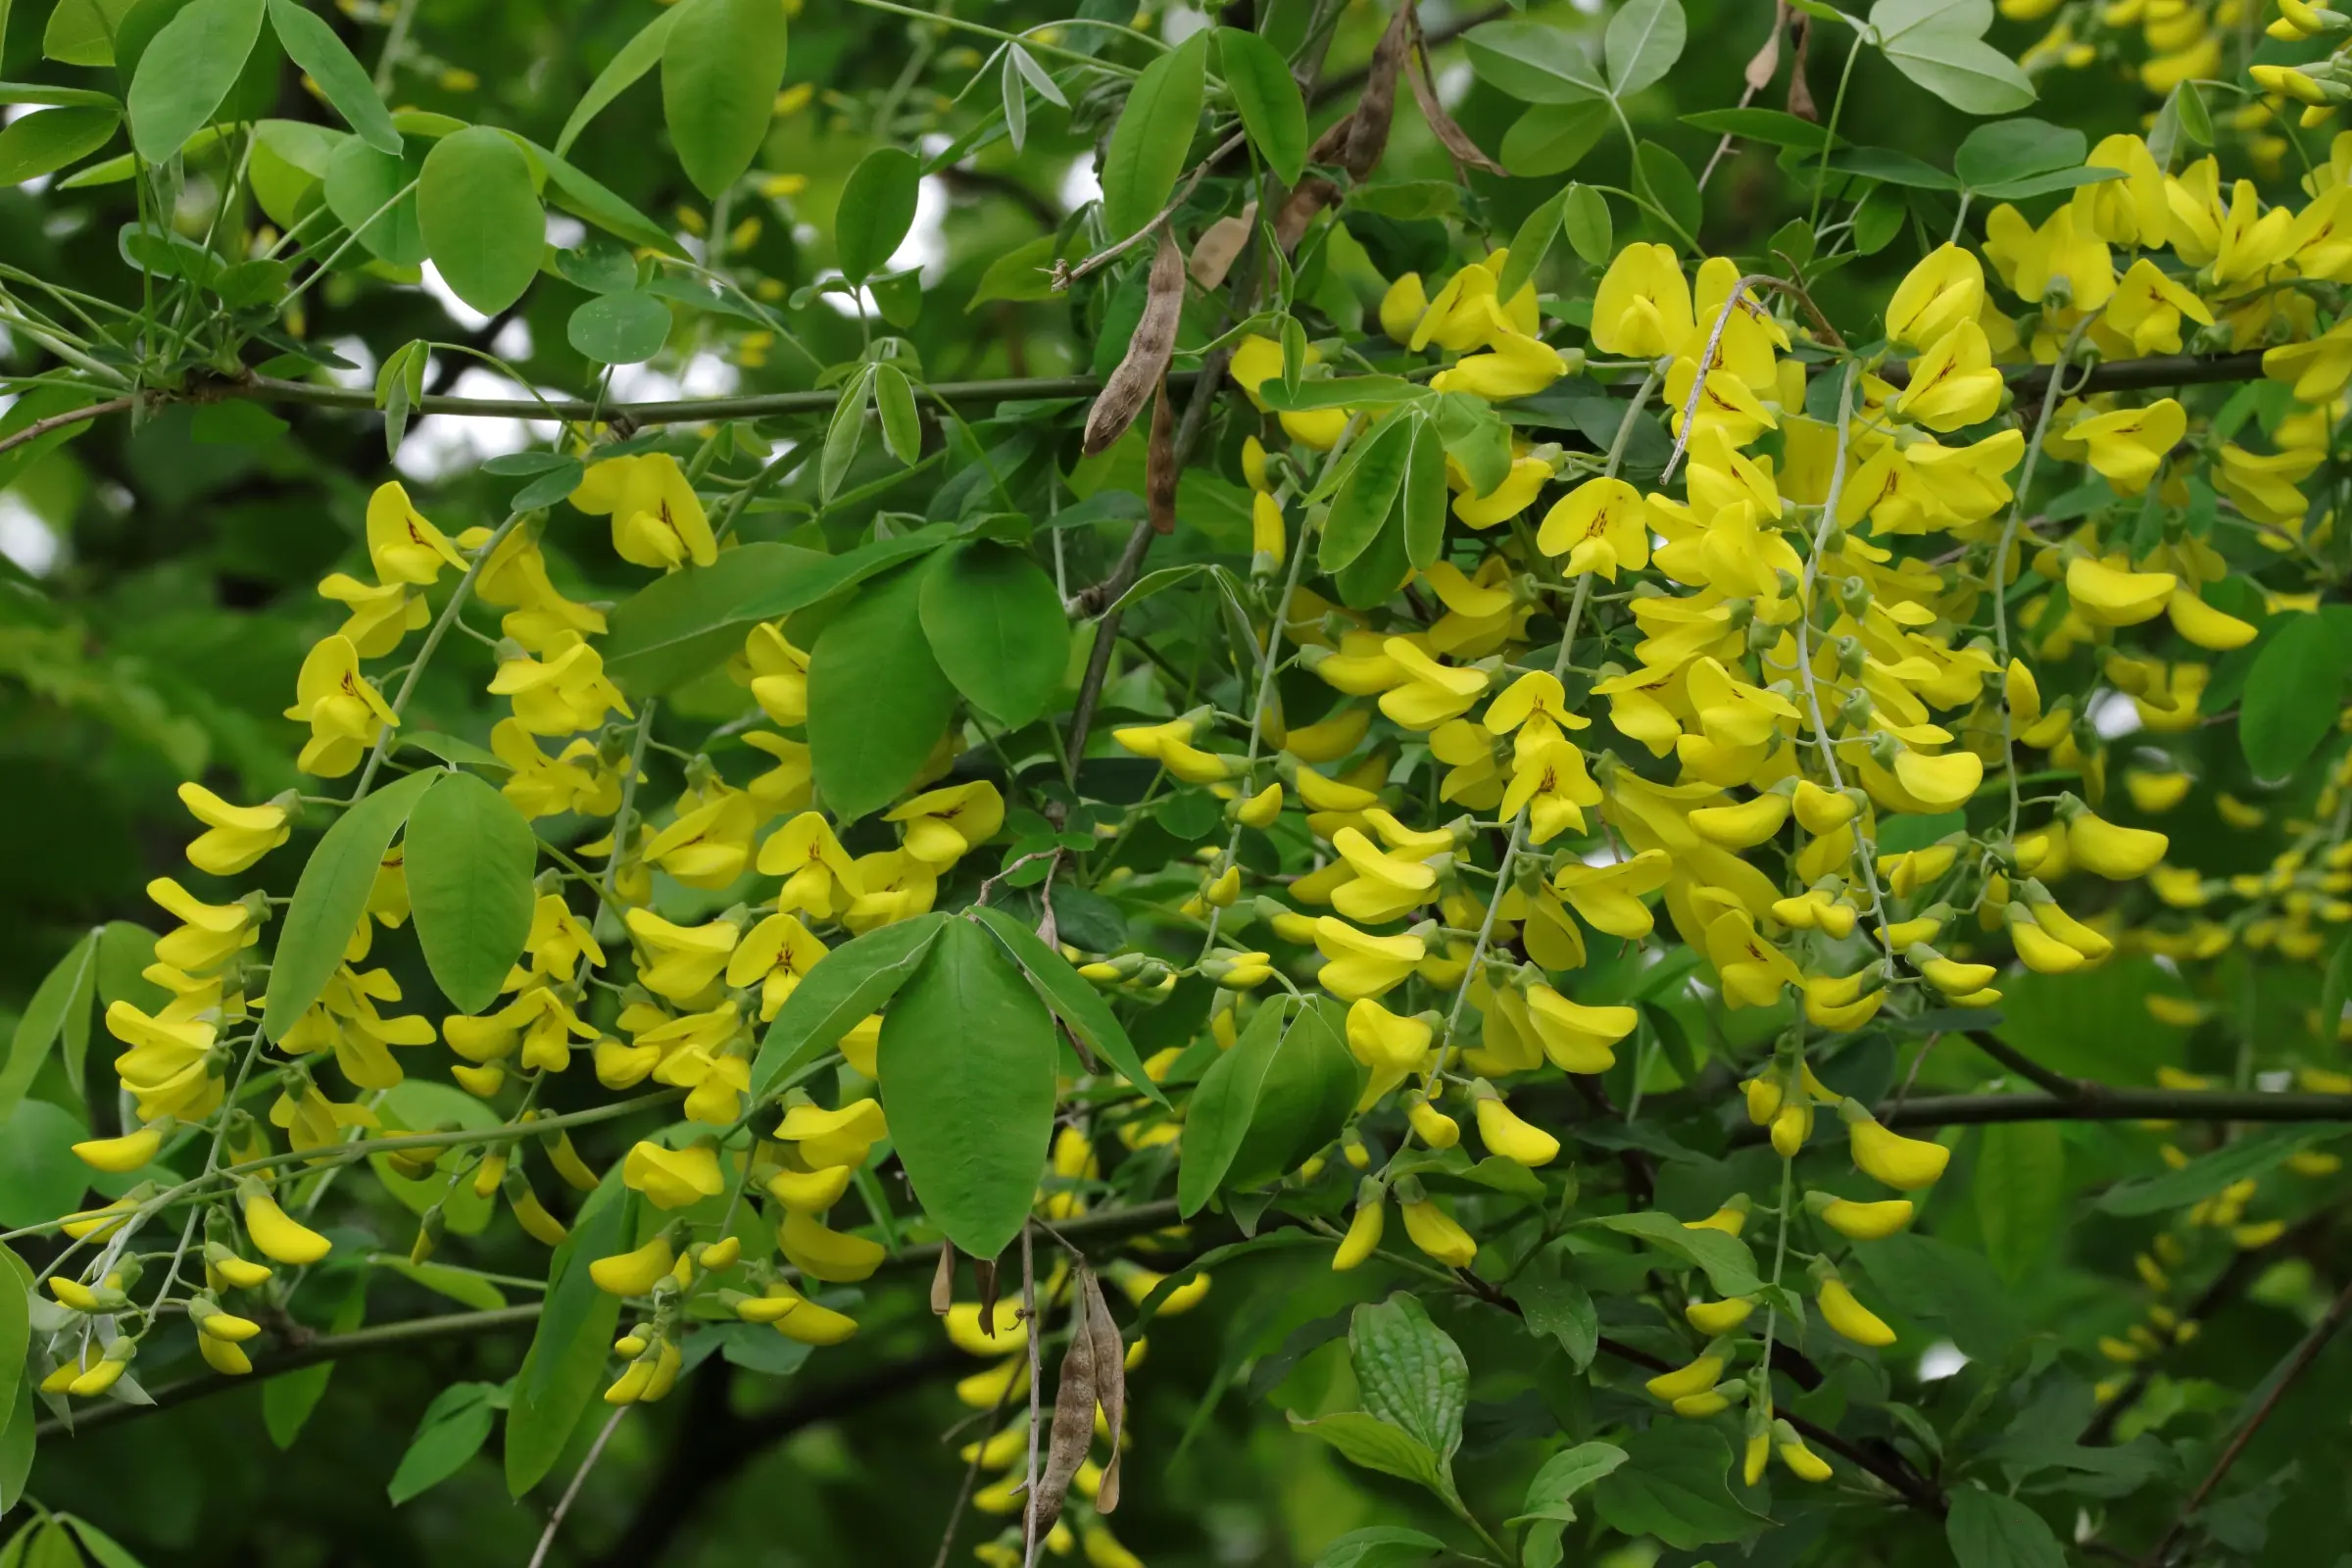 Laburnum - panicles with yellow butterfly flowers